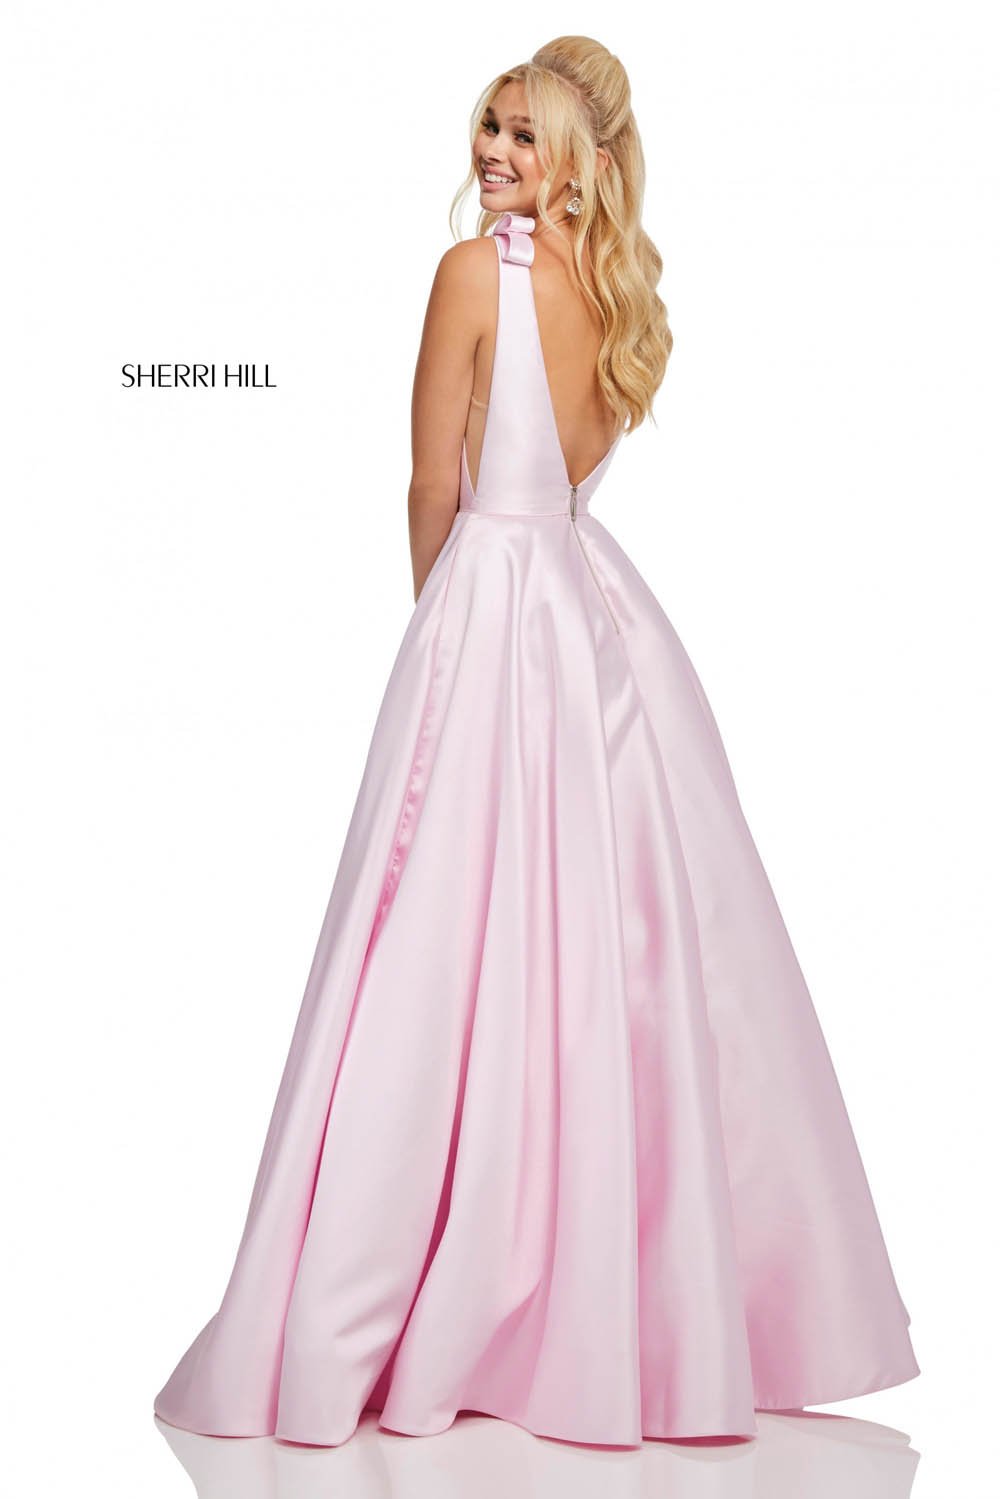 Sherri Hill 52574 dress images in these colors: Lilac, Ivory, Light Pink, Light Blue.